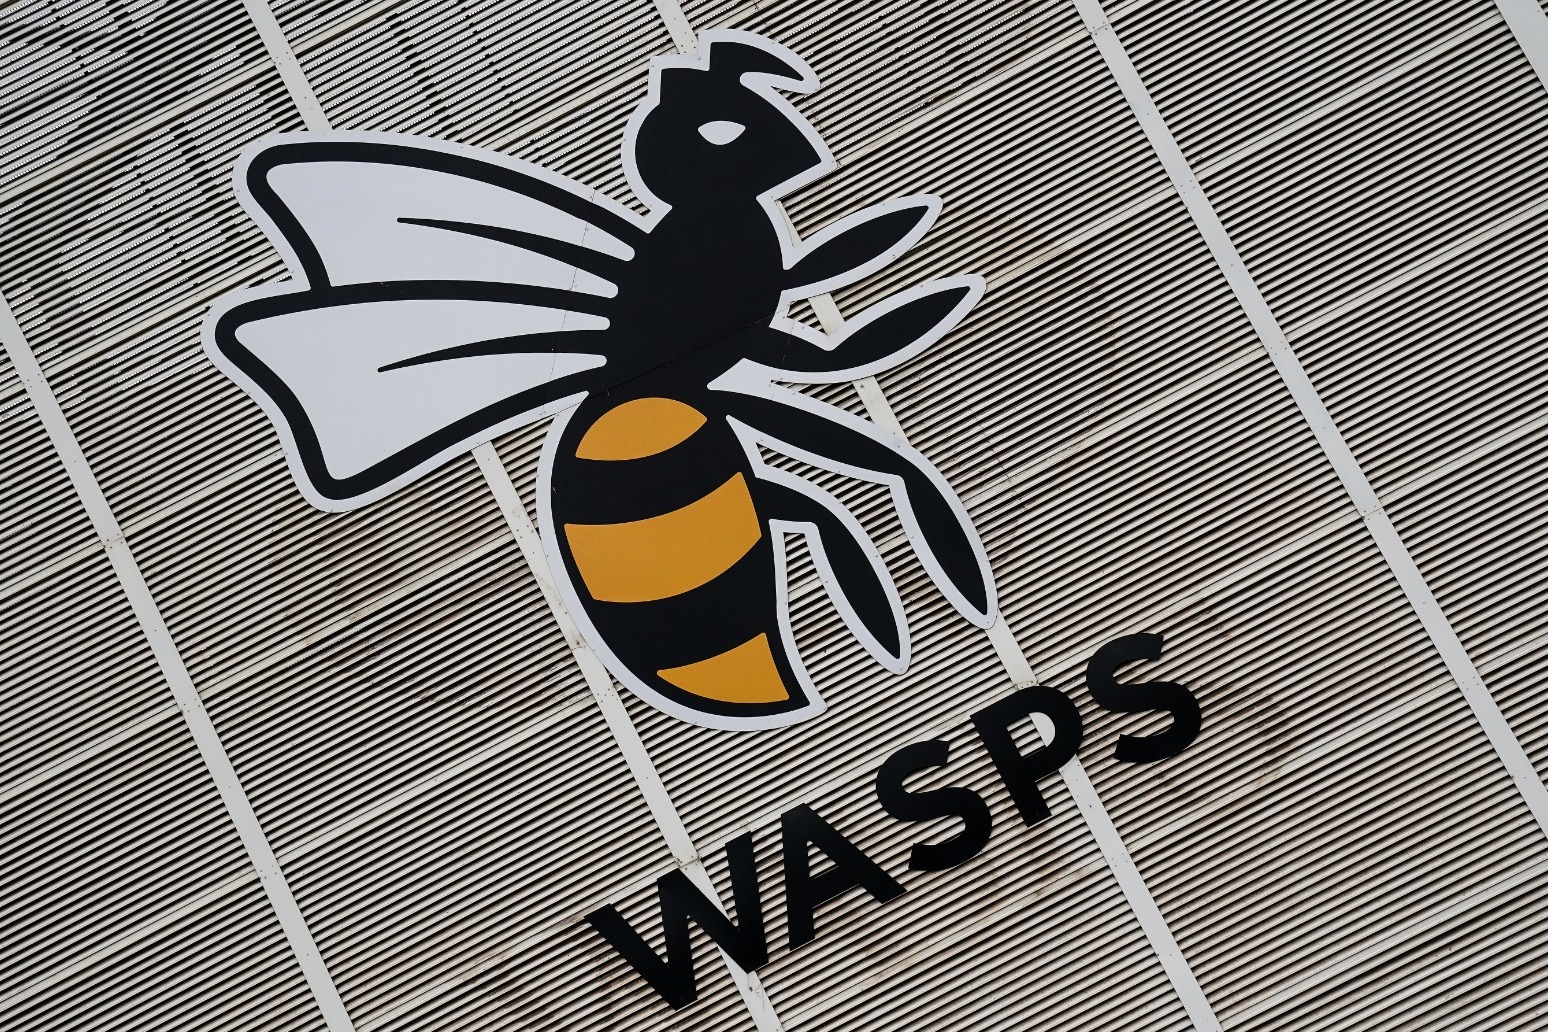 Wasps placed into administration as holding company ceases trading 